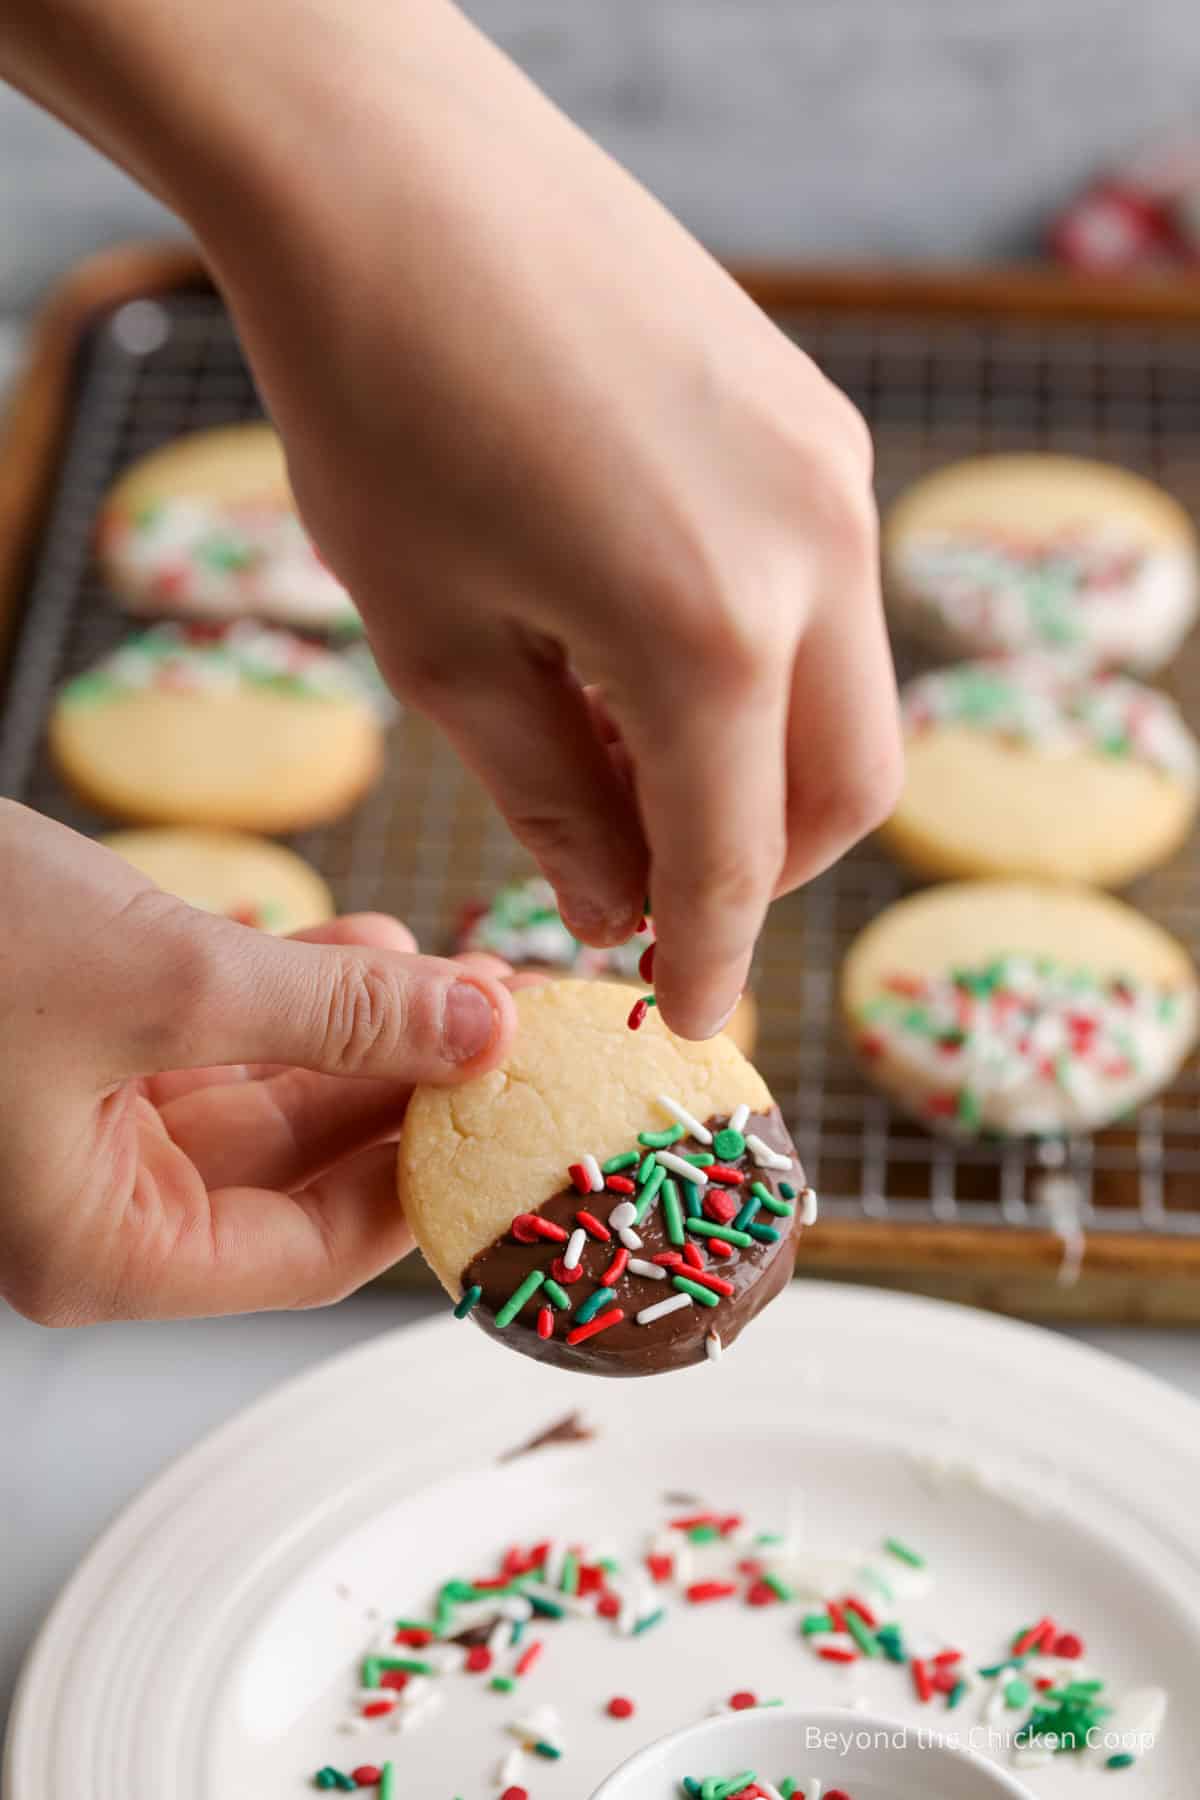 Adding sprinkles to a cookie.